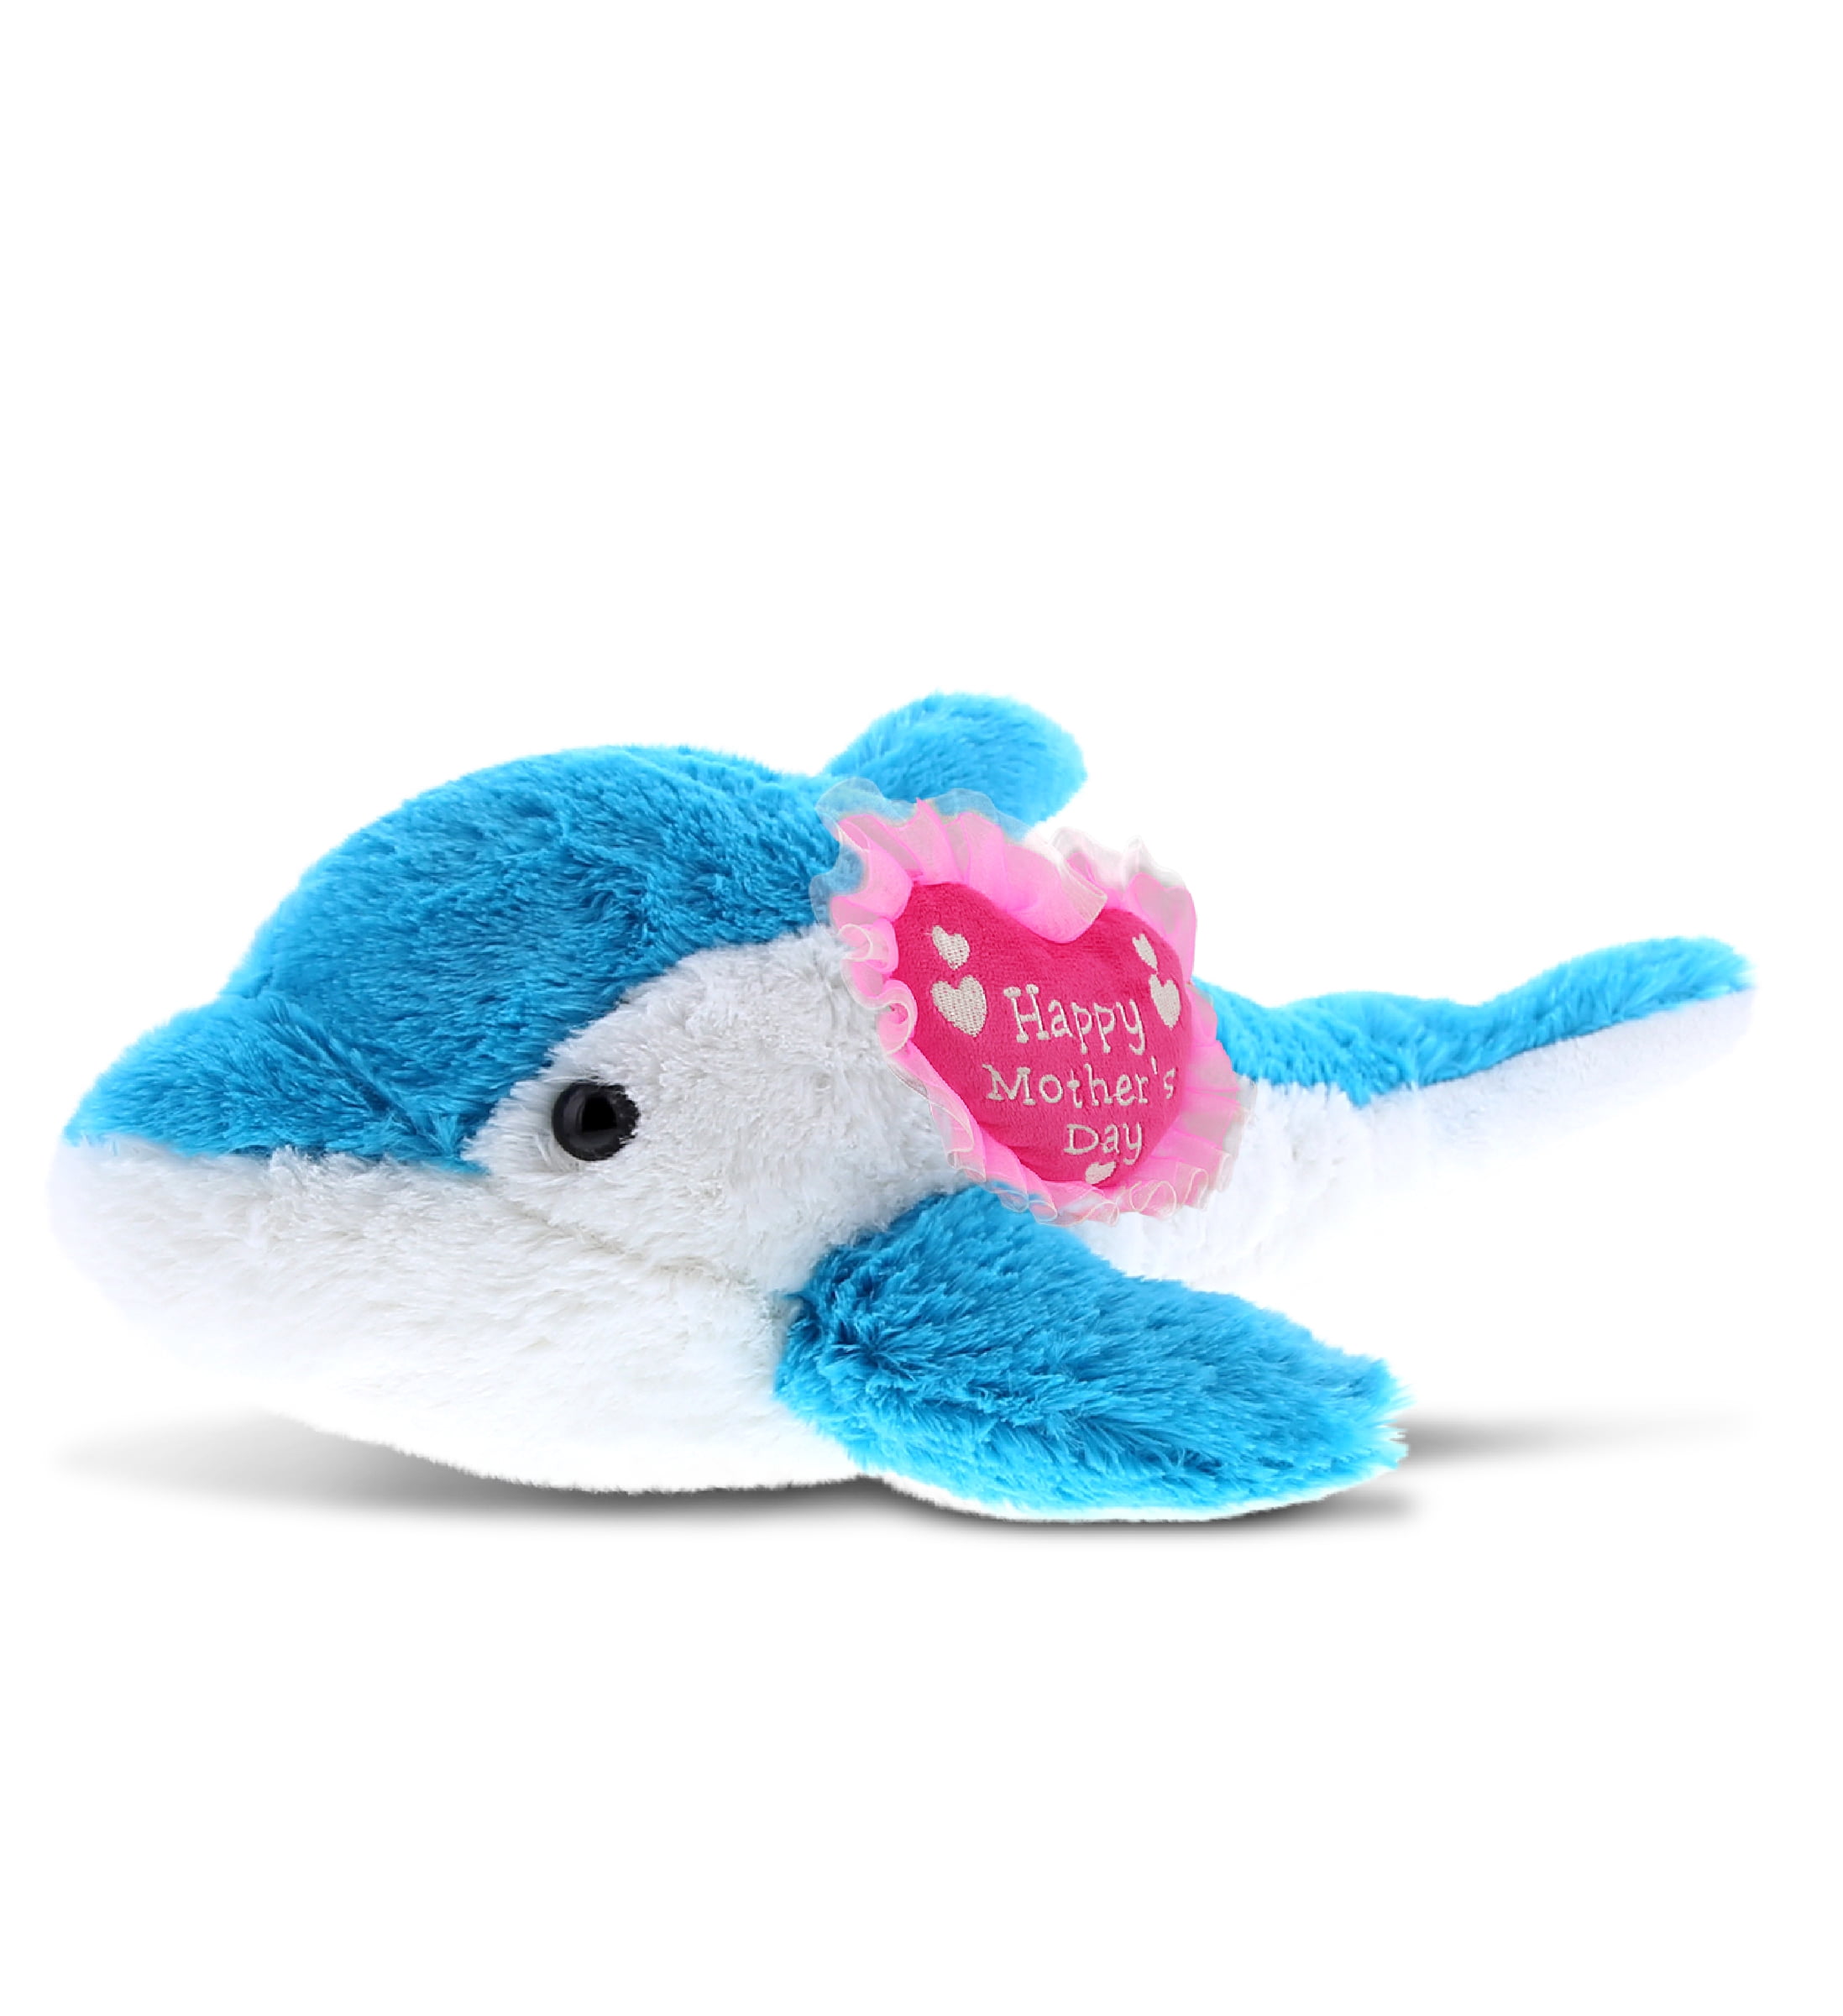 Grandma DolliBu Happy Mother's Day Personalized Soft Plush Blue Dolphin with Pink Heart Message for Best Mommy Wife 11.75 Daughter